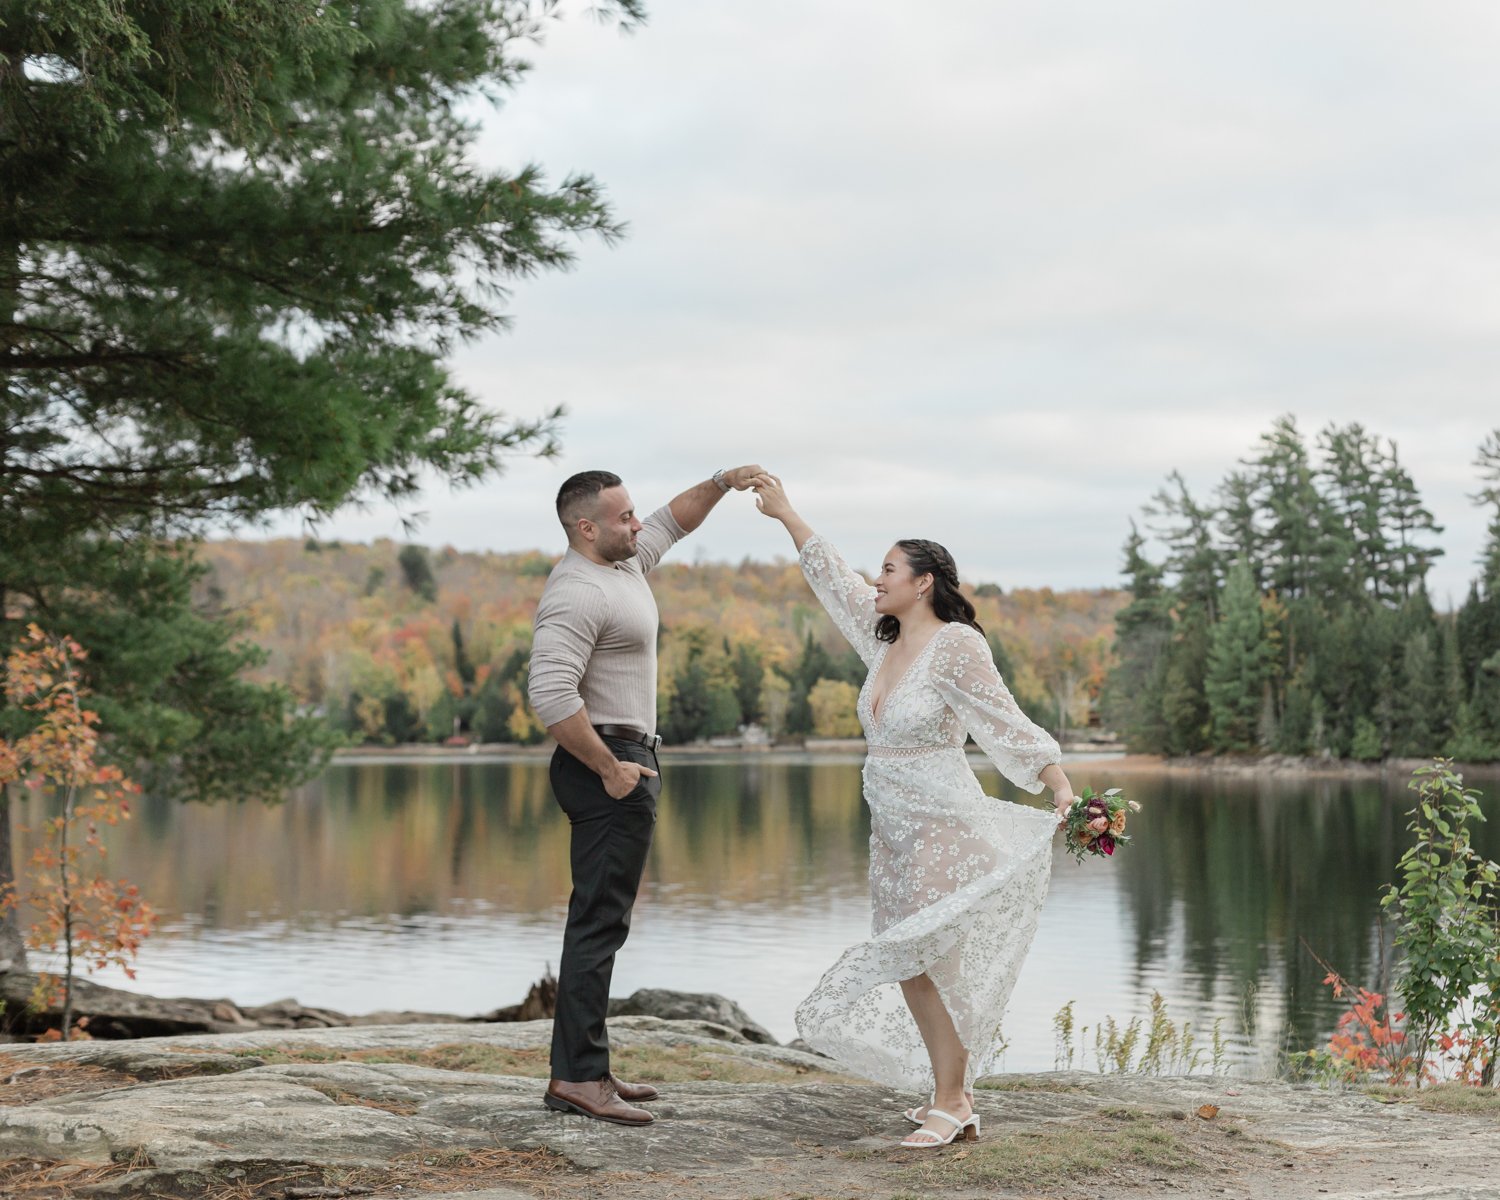 A couple dancing after their elopement ceremony in Muskoka